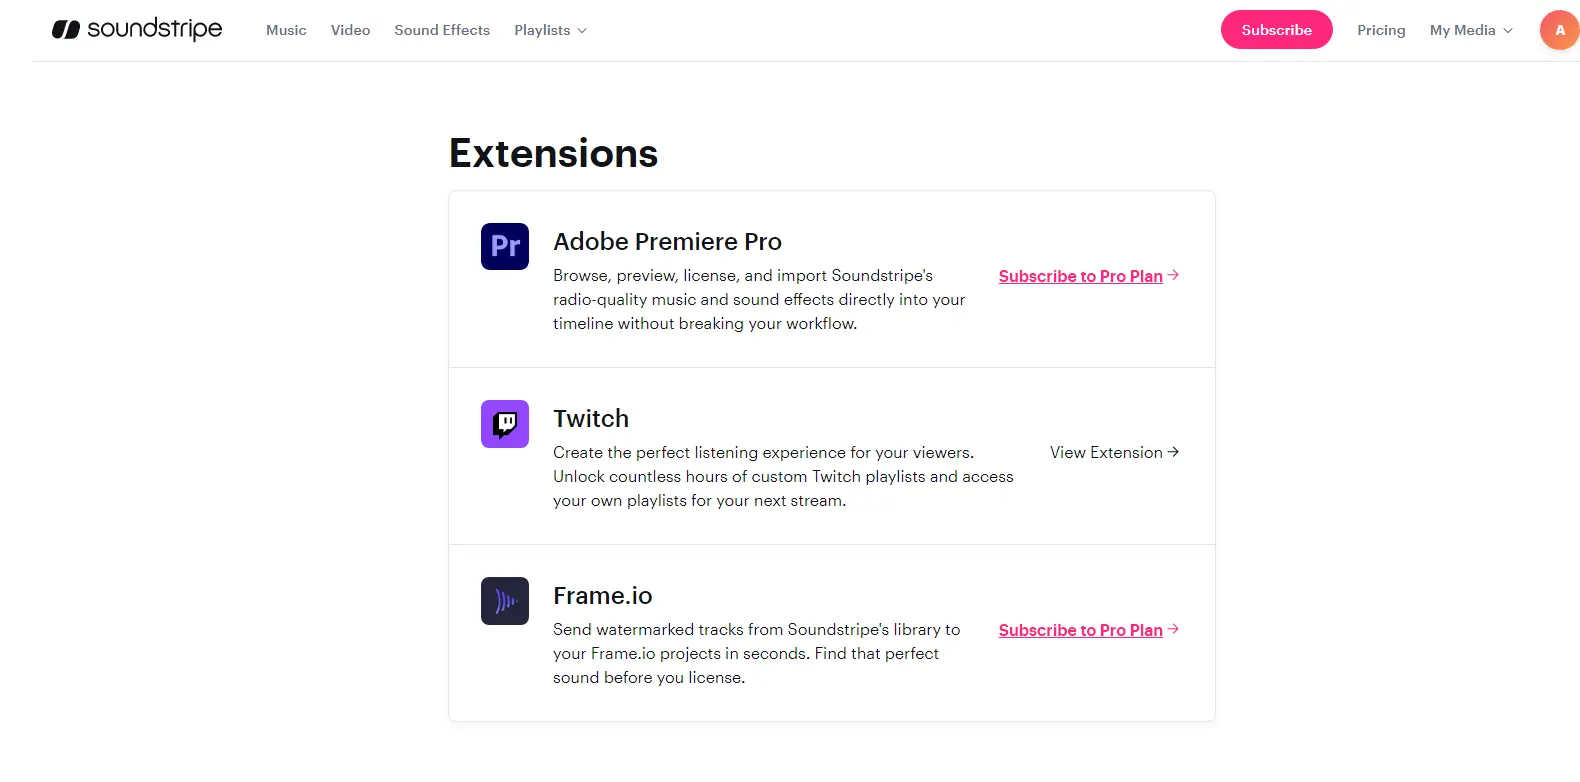 Soundstripe Extensions - Highlights the extensions library in Soundstripe, offering additional features and tools for users.